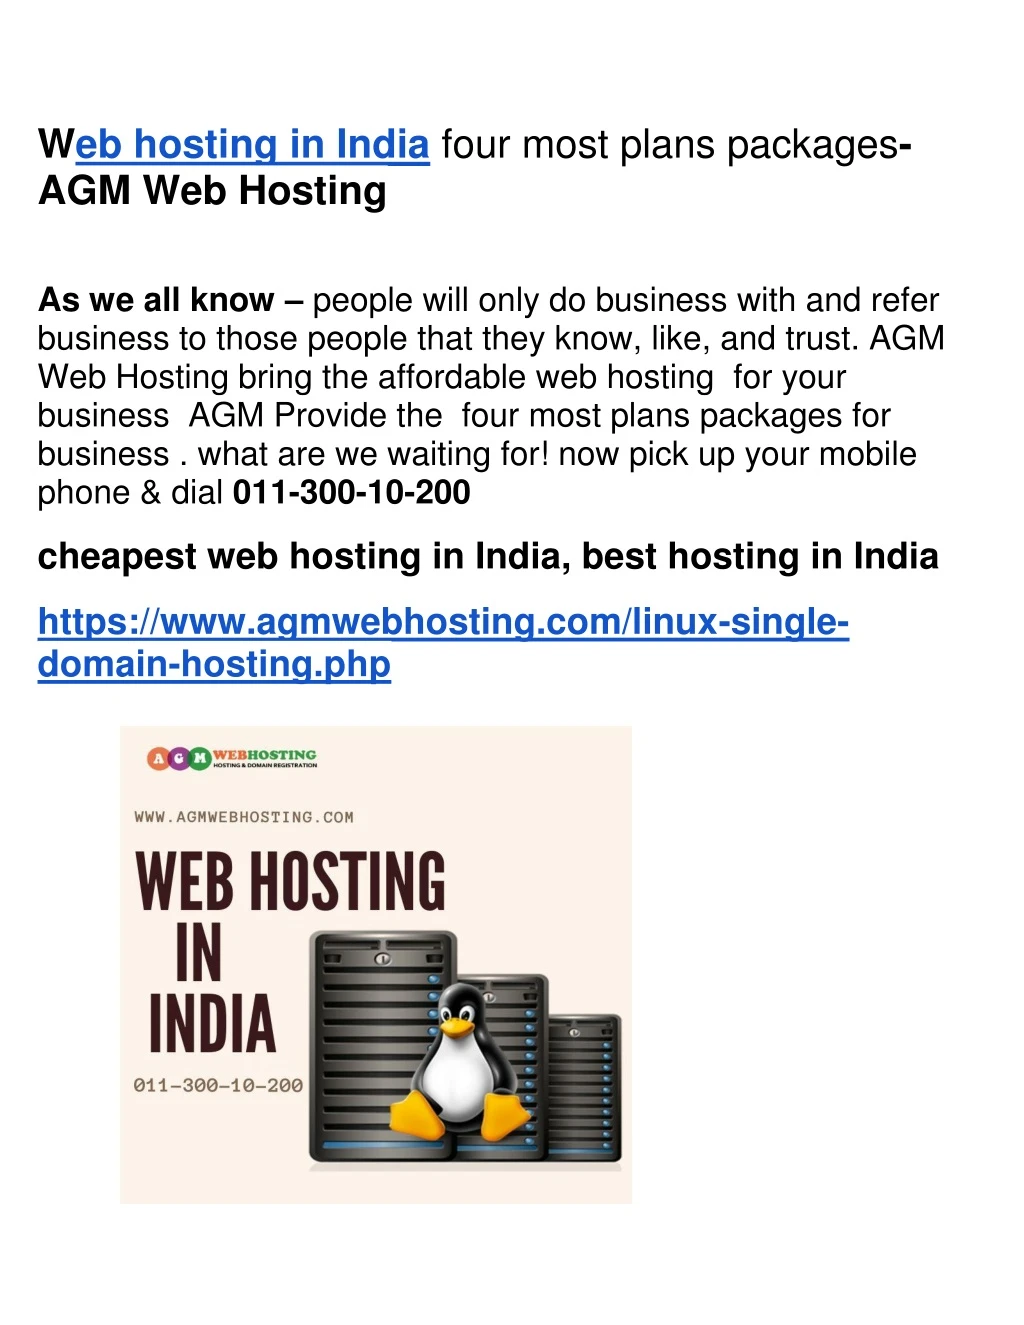 web hosting in india four most plans packages